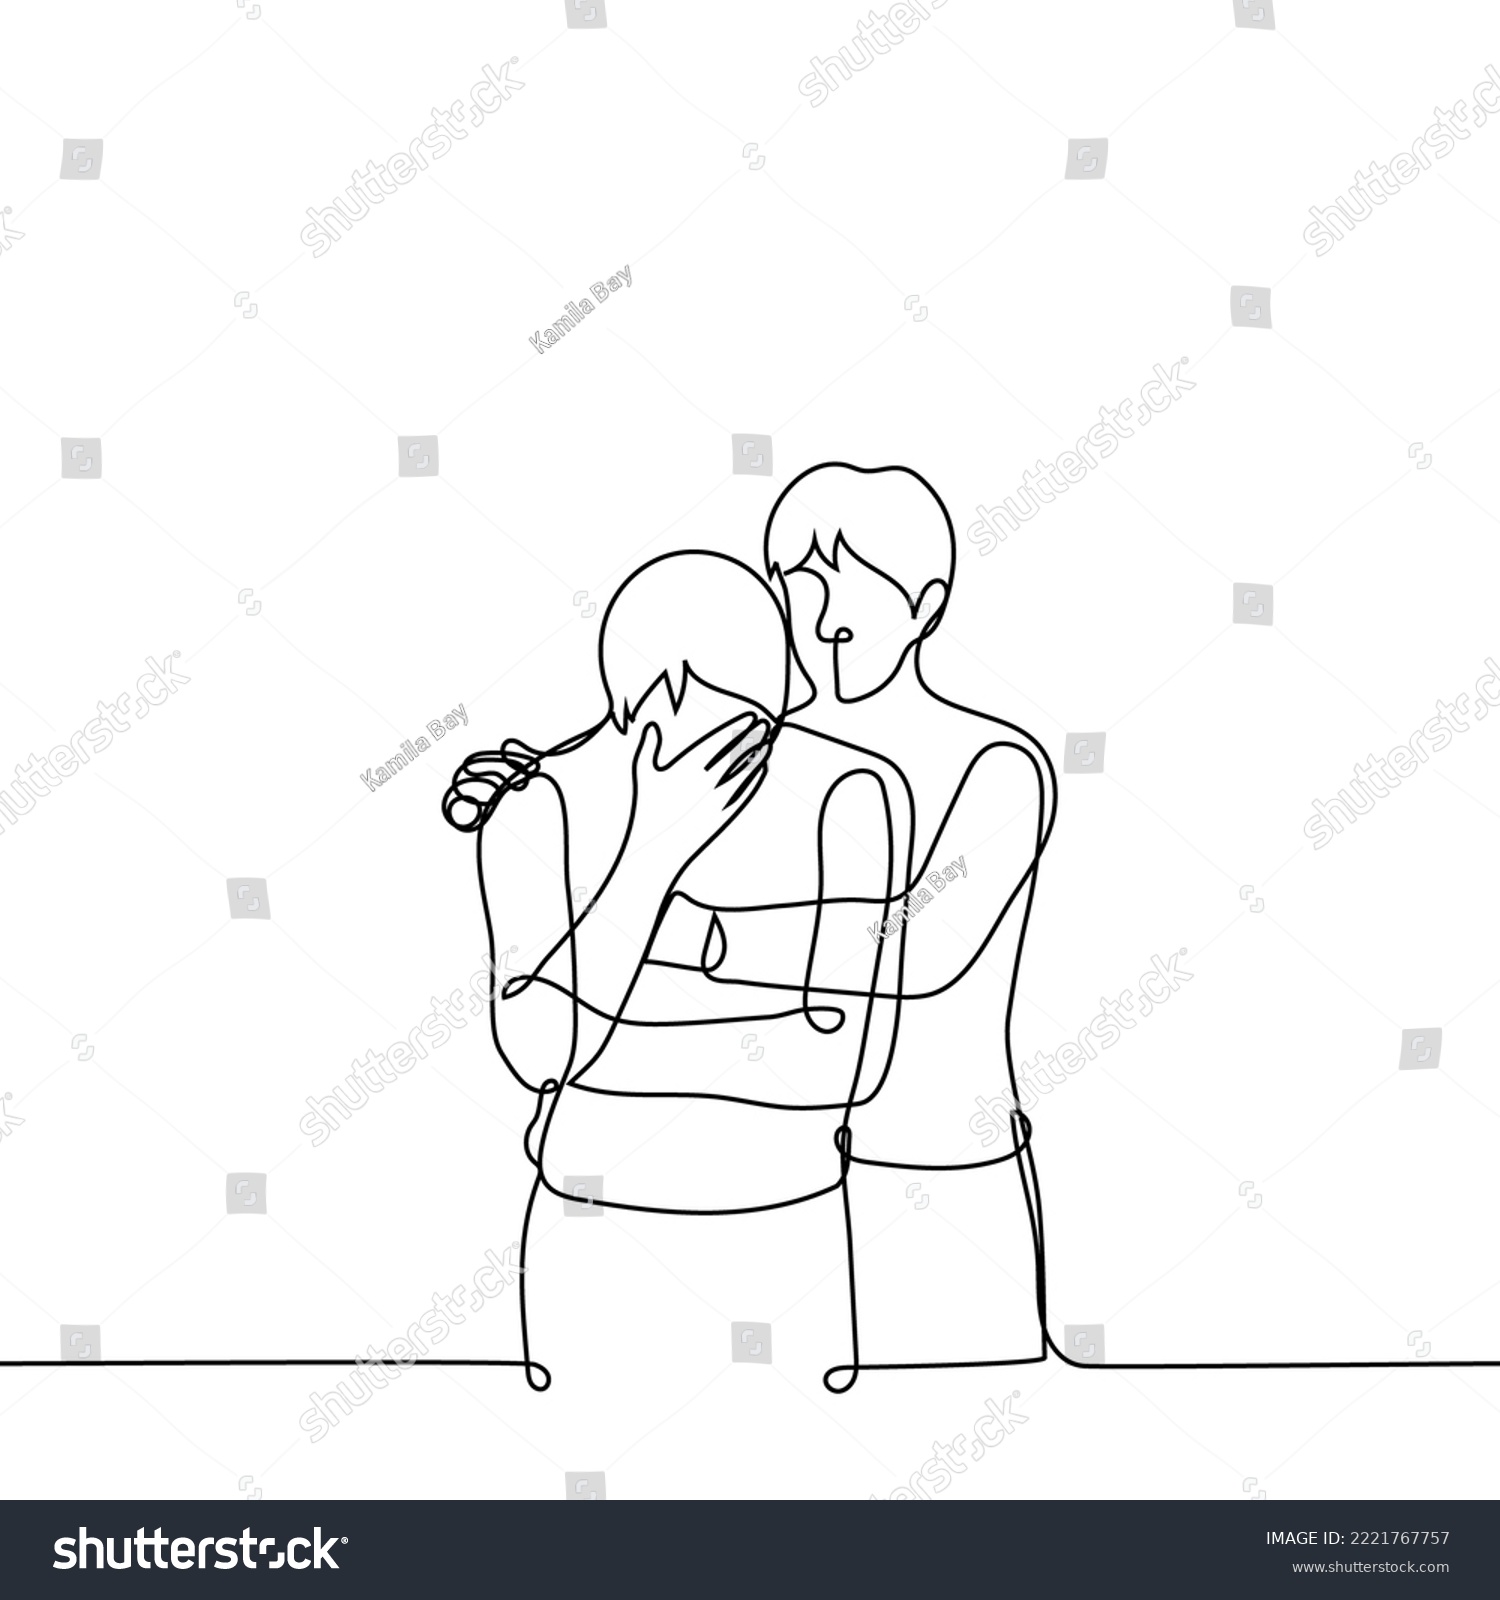 SVG of man sobbing covering his face with his hand from the back stroking and calming another man - one line drawing vector. concept comfort a loser or bereaved loved one, support a friend or family member svg